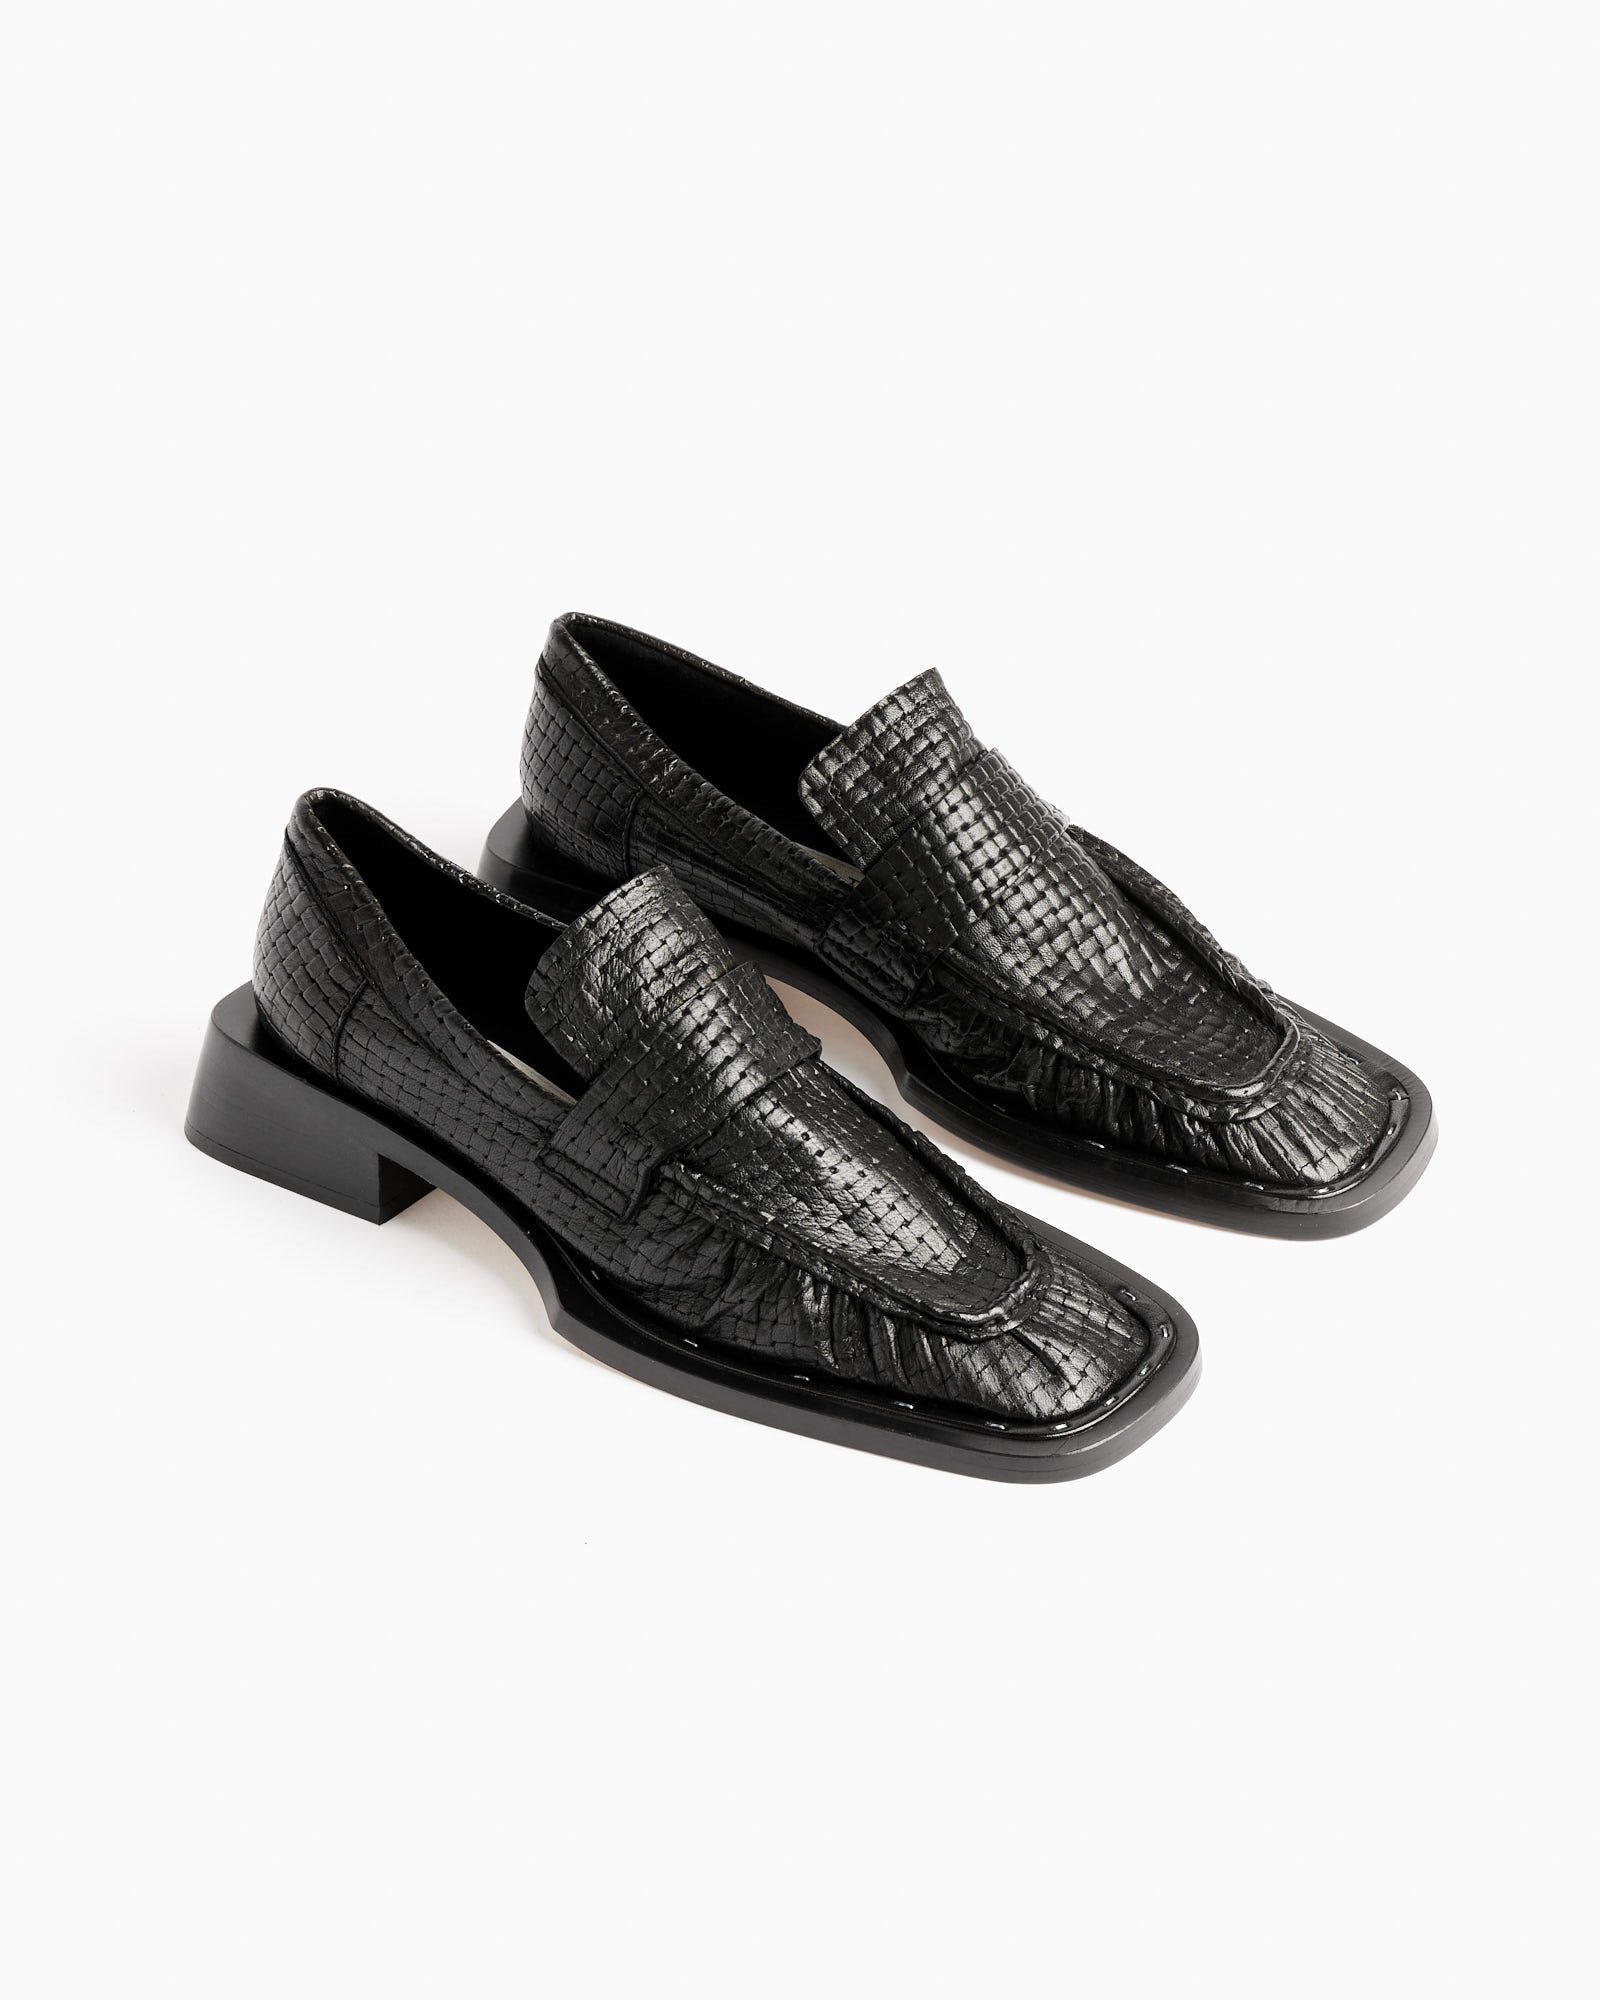 Airi Loafers in Black